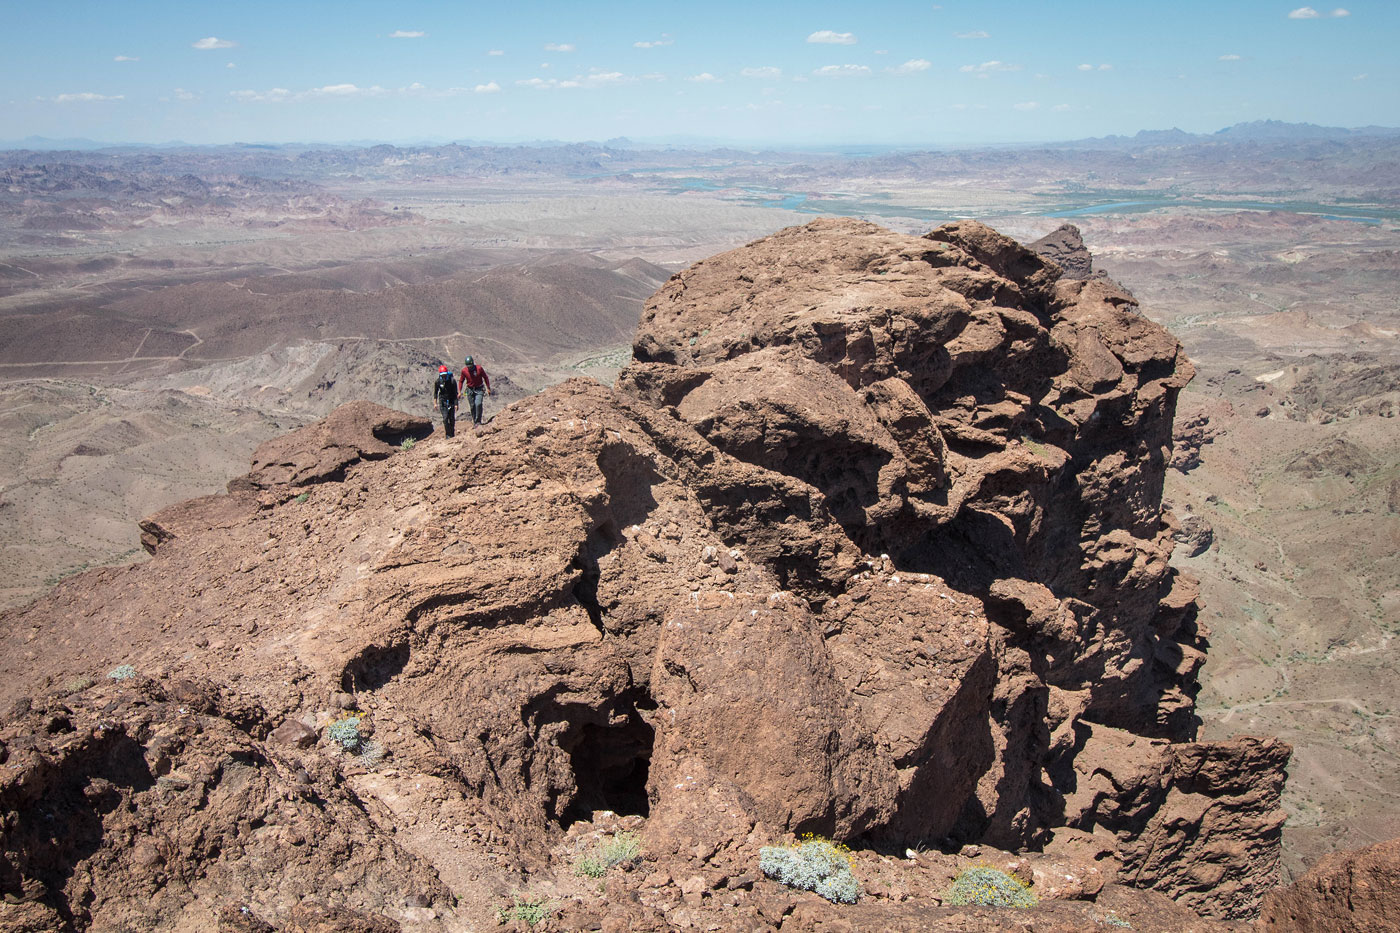 Hike Picacho Peak in Chocolate Mountains BLM, California - Stav is Lost